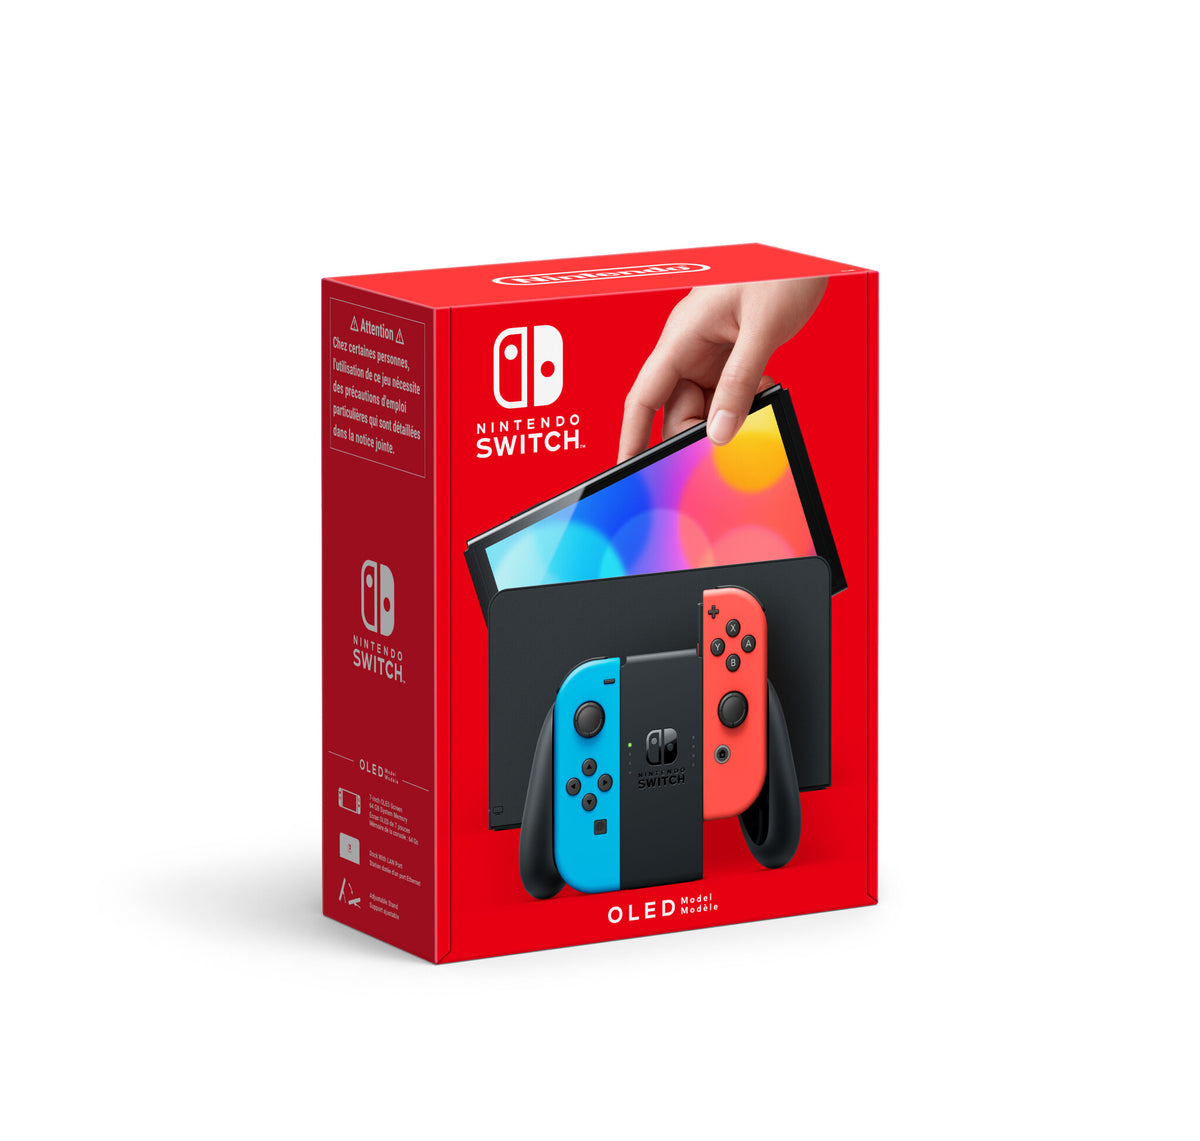 Nintendo Switch (OLED Model) - 64 GB - Neon Red / Blue